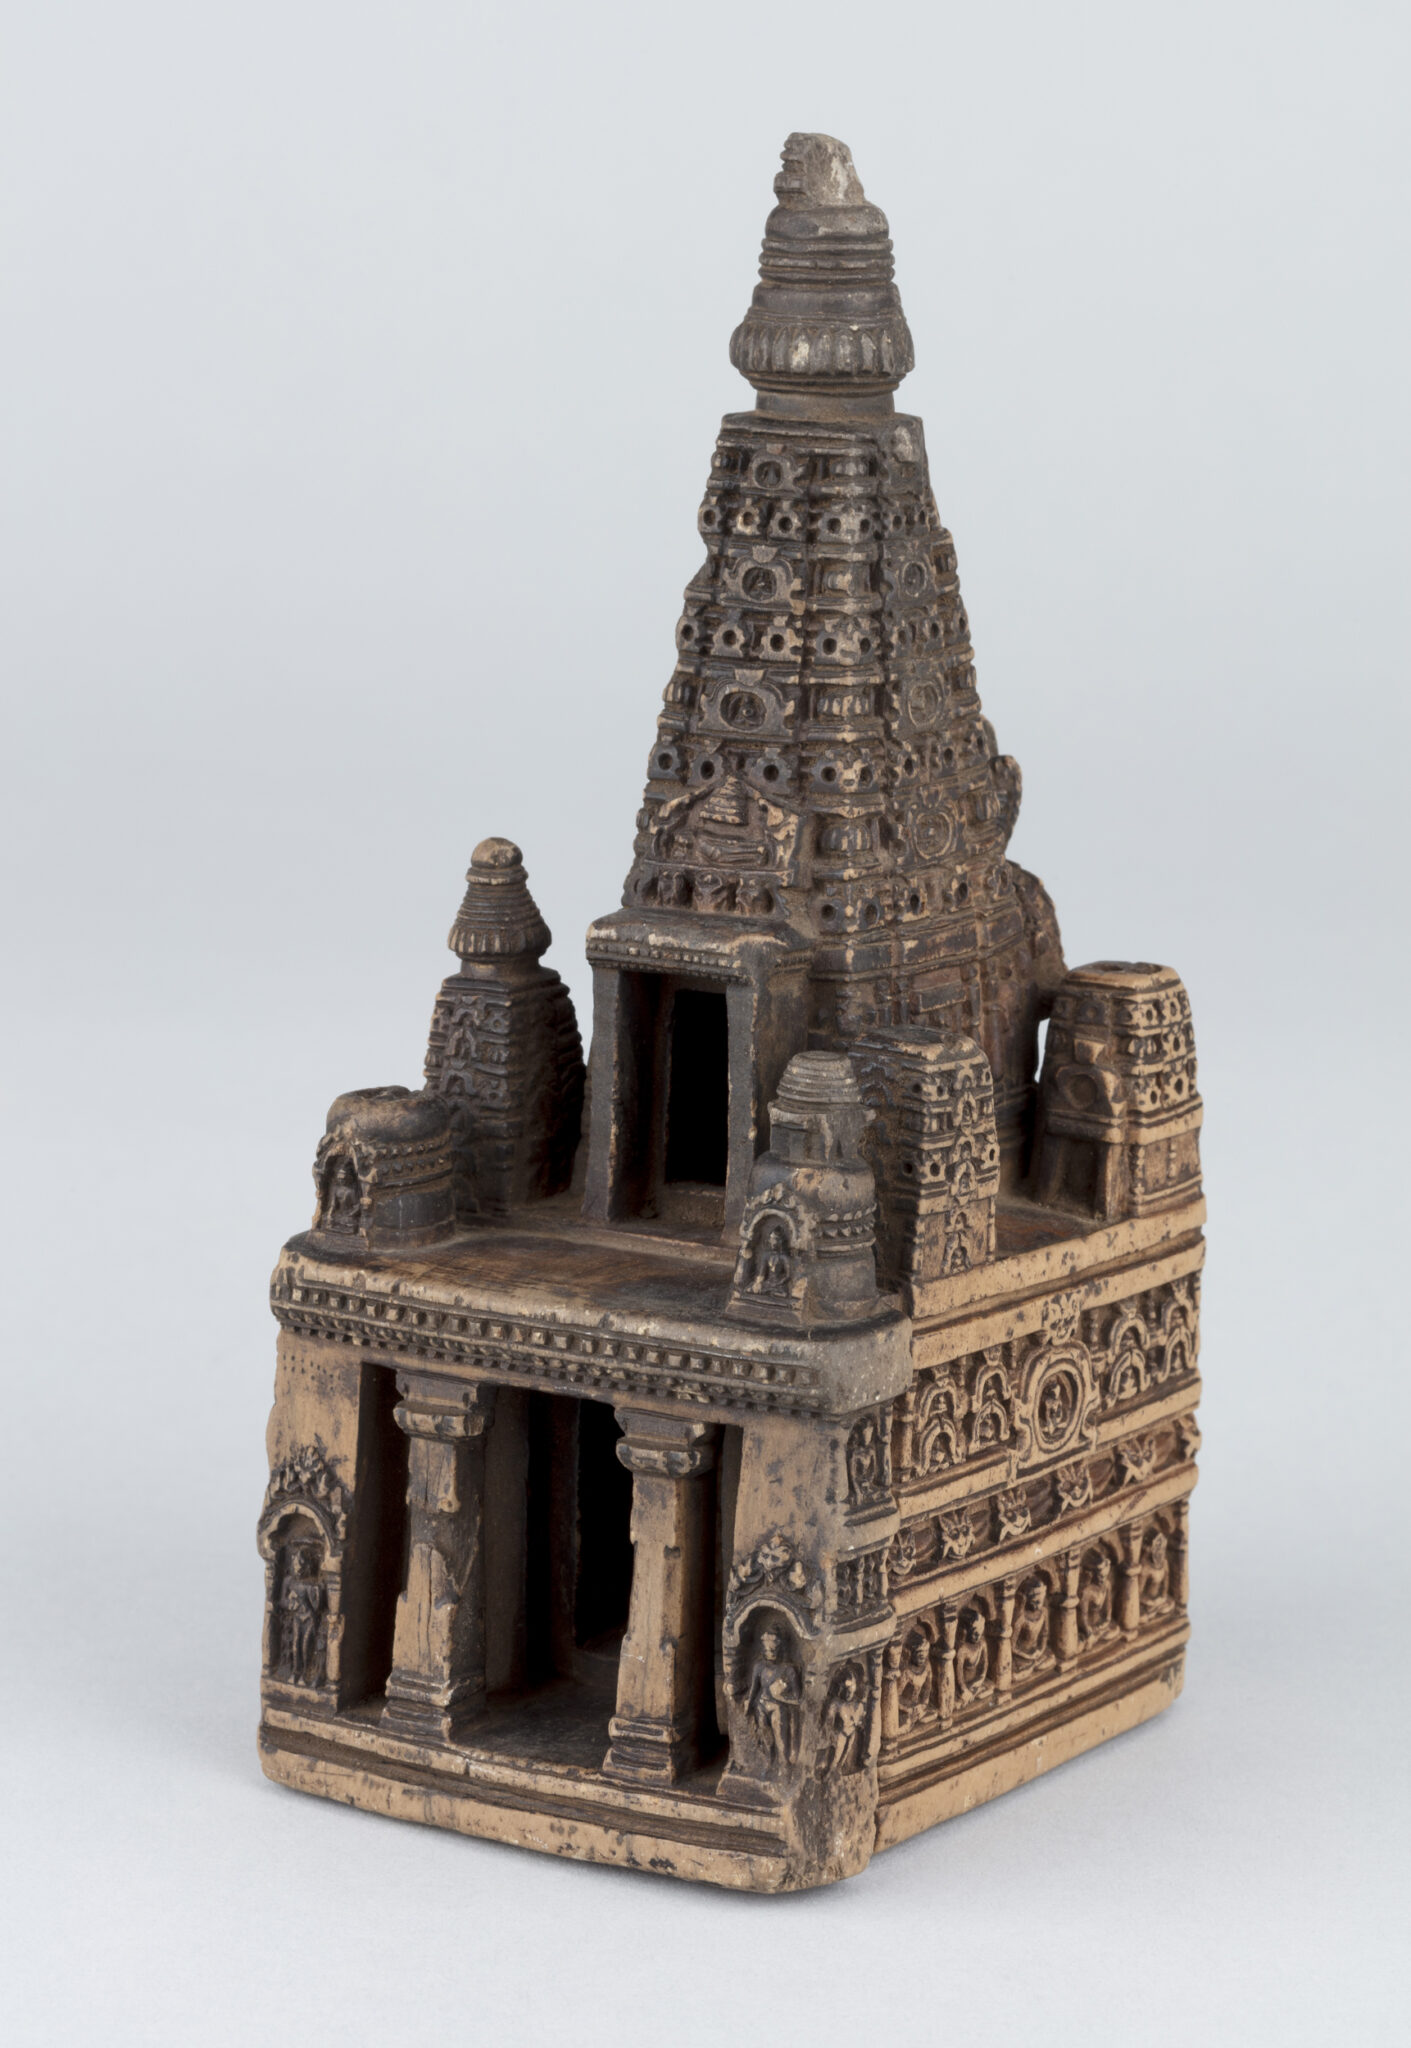 Miniature brown architectural model featuring square base with portico and slender tapered roof; decorated with intricately carved moldings